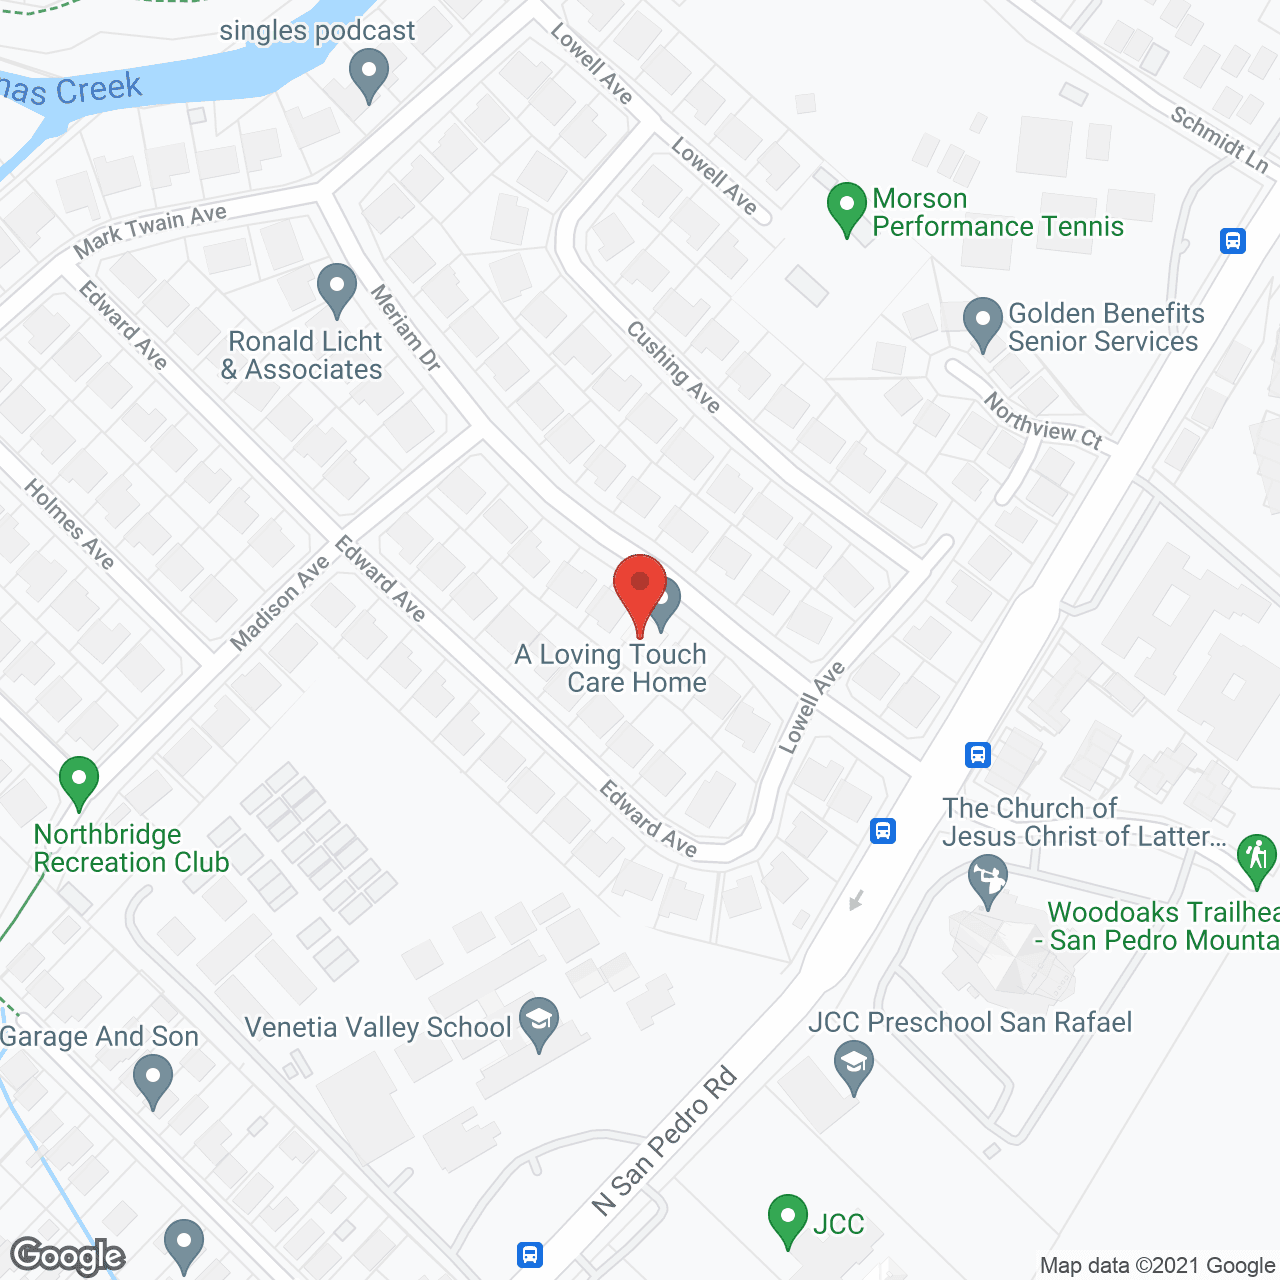 A Loving Touch Care Home in google map